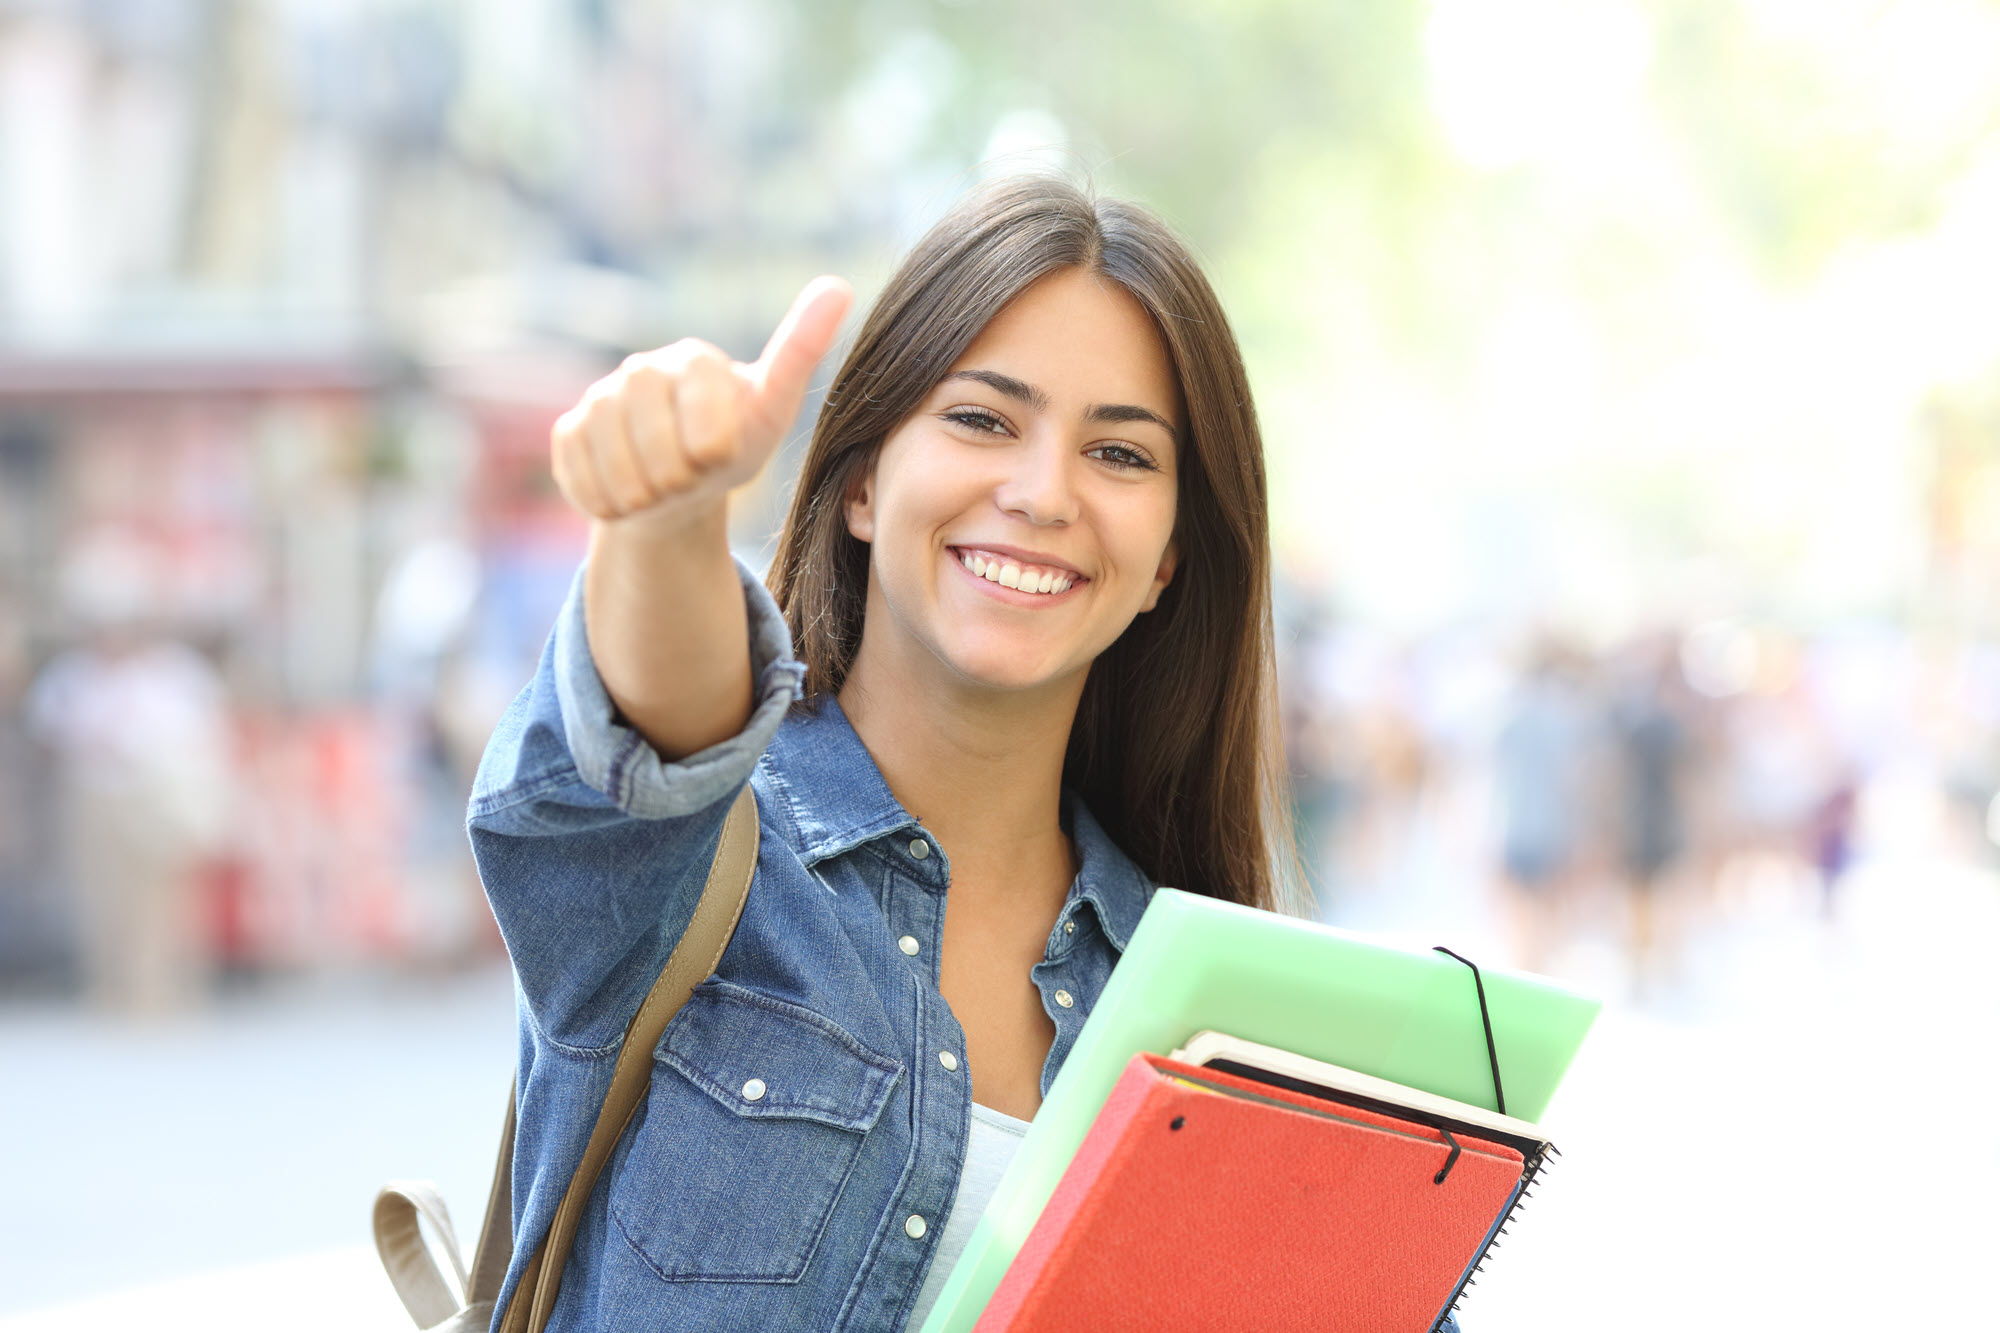 female student thumbs up